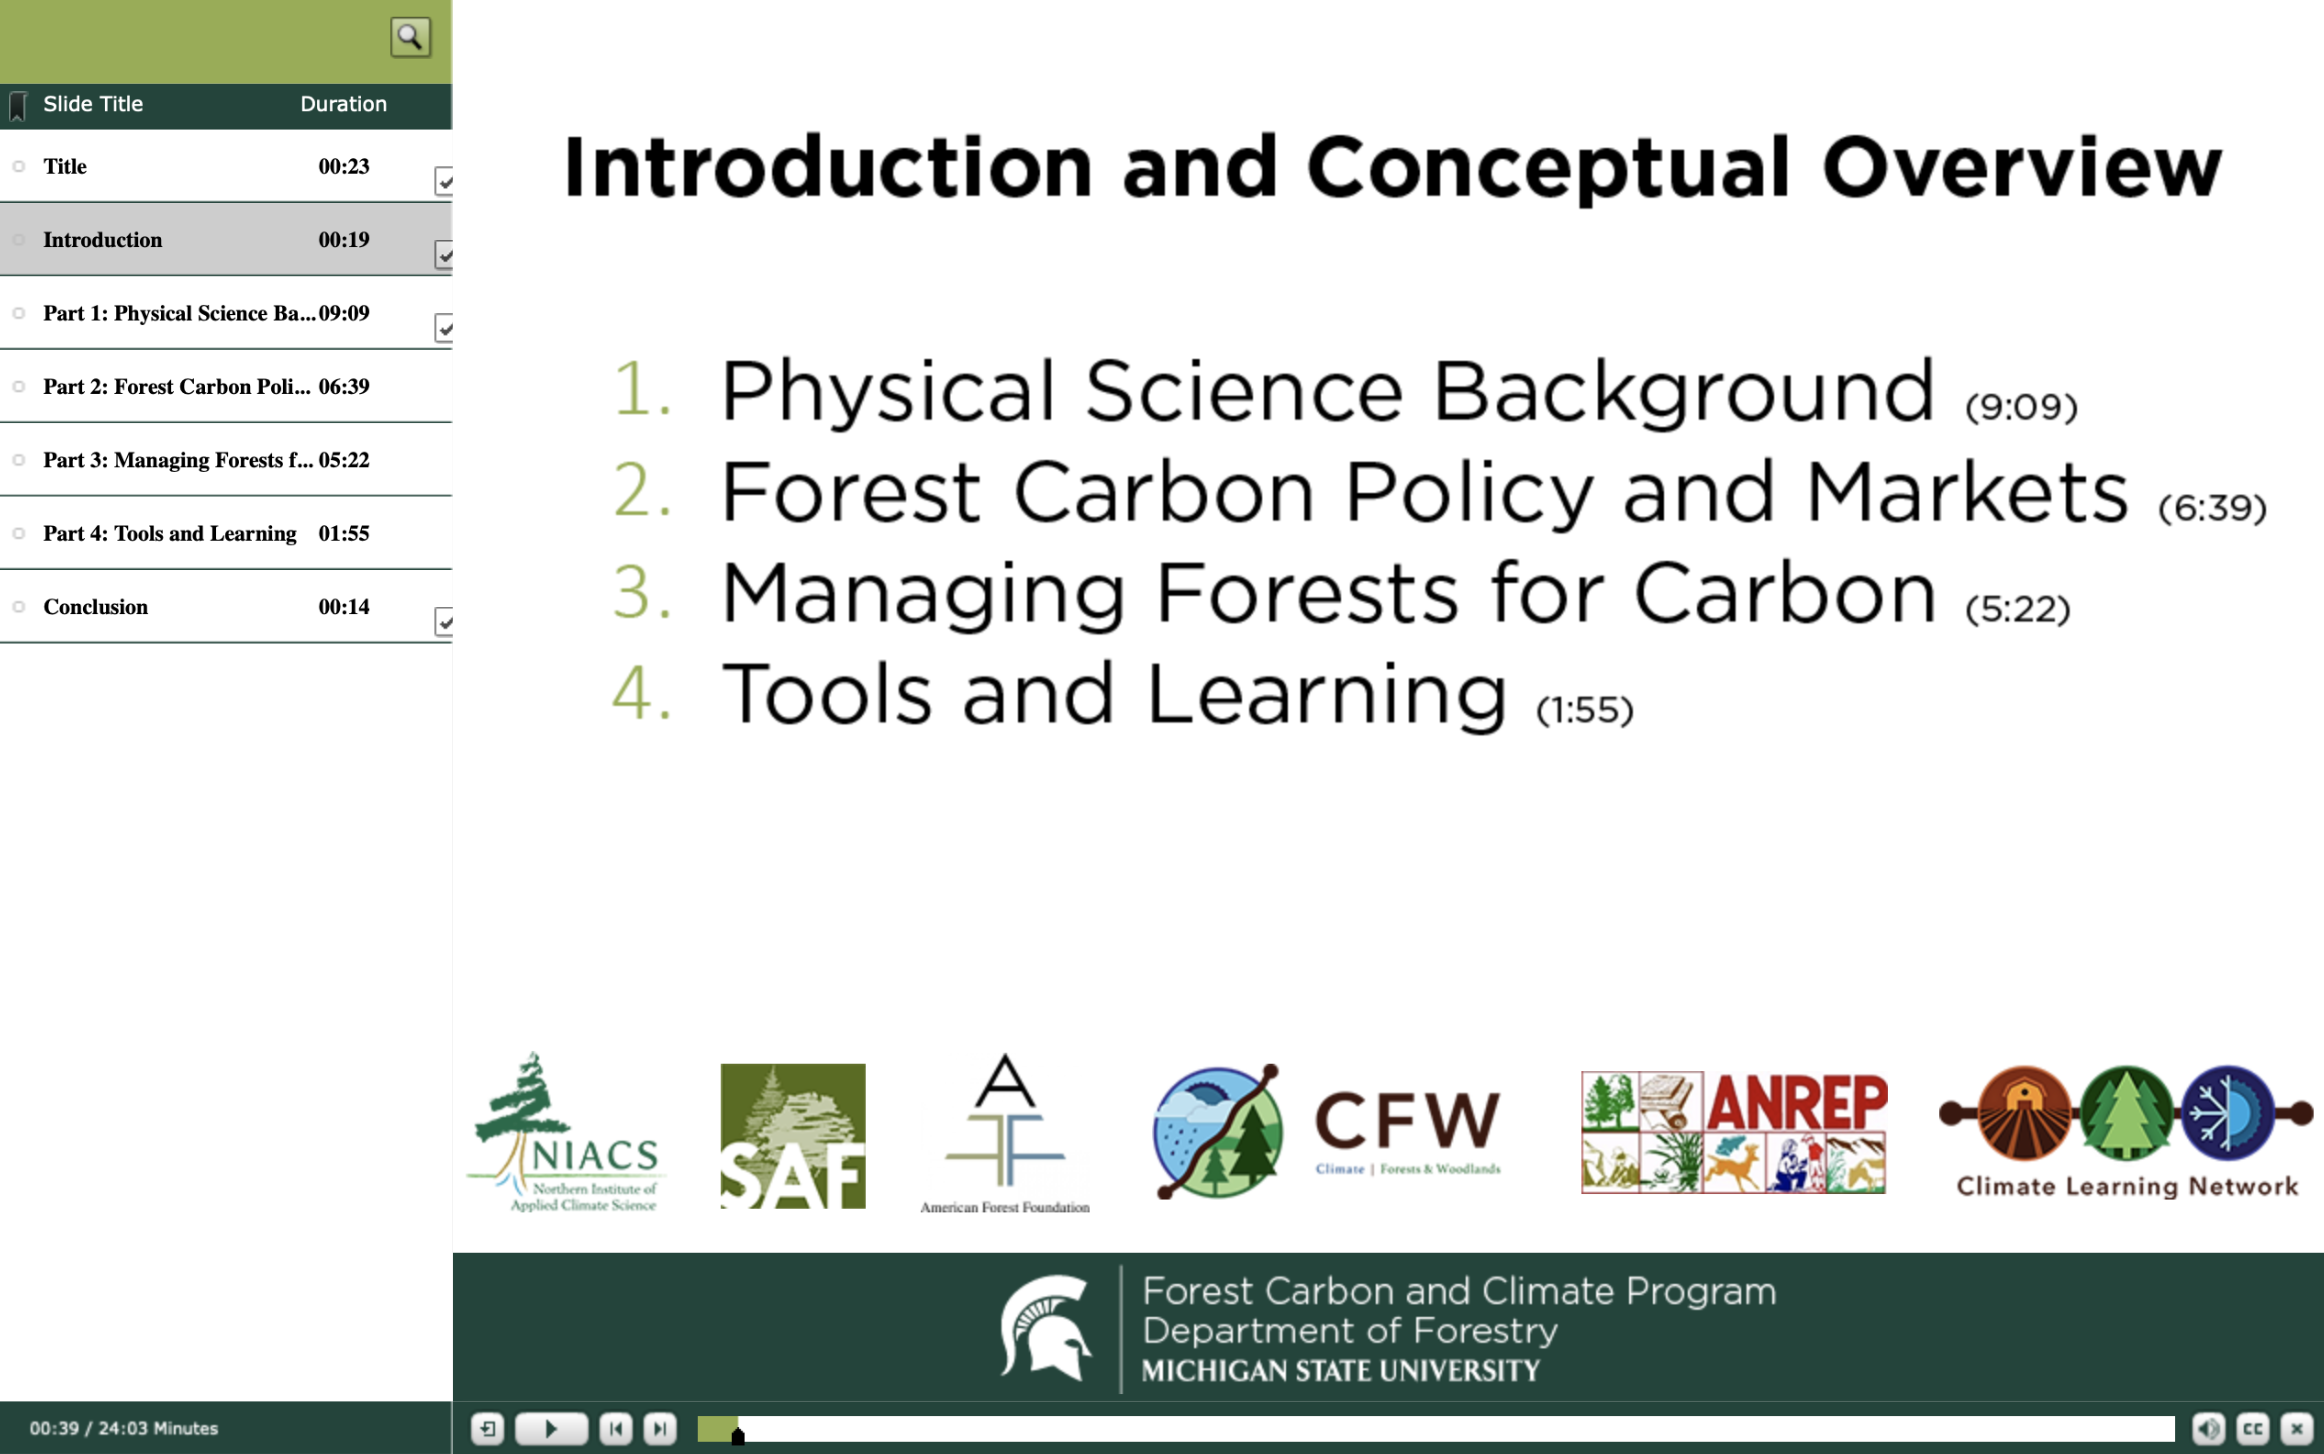 Introduction and Conceptual Overview: 1. Physical Science Background, 2. Forest Carbon Policy and Markets, 3. Managing Forest for Carbon, 4. Tools and Learning